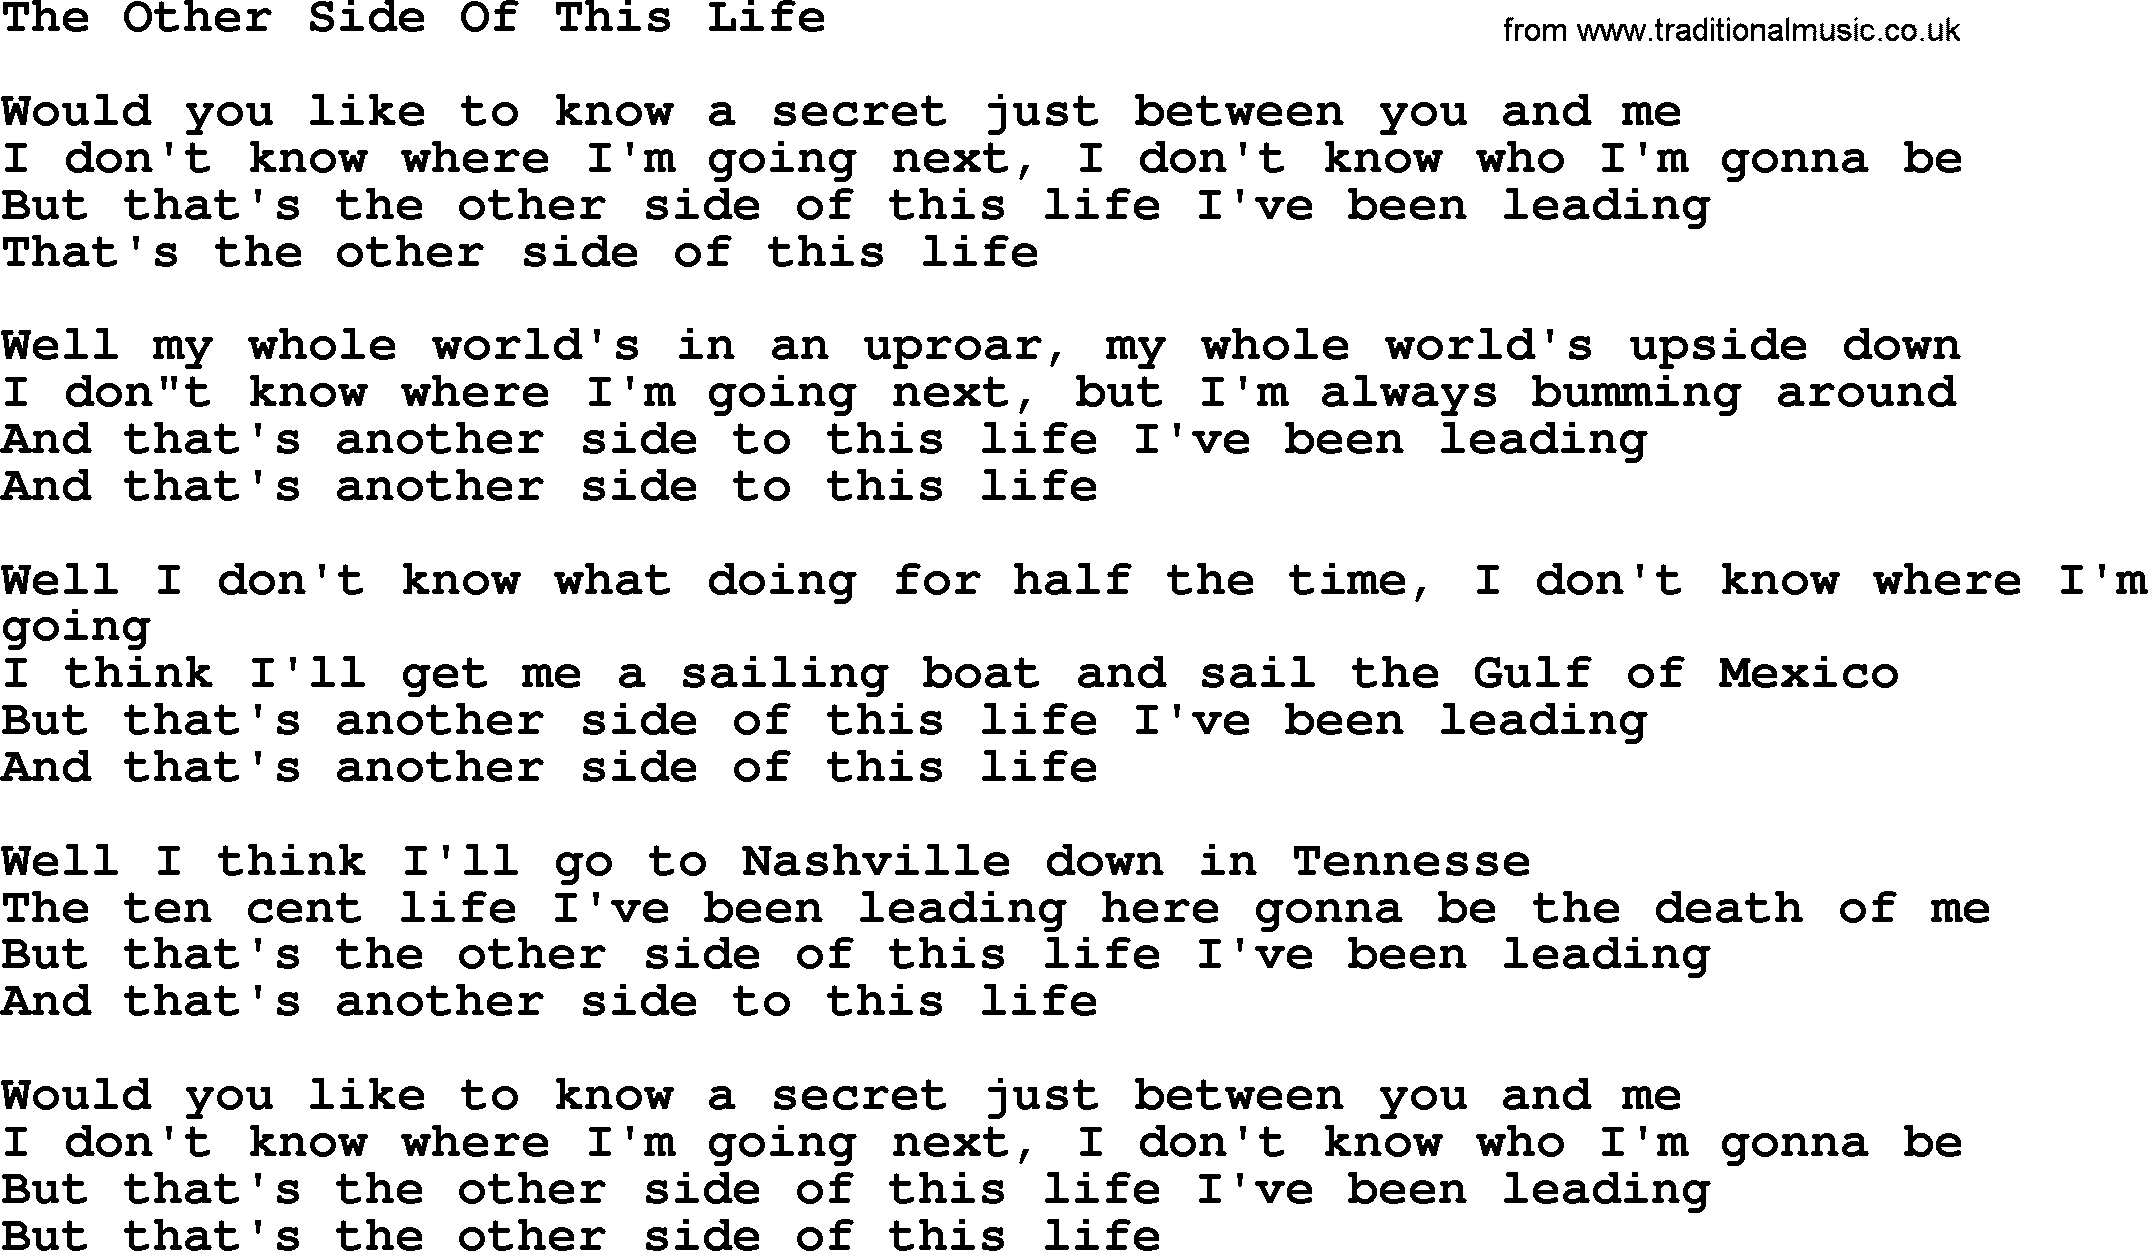 The Byrds song The Other Side Of This Life, lyrics